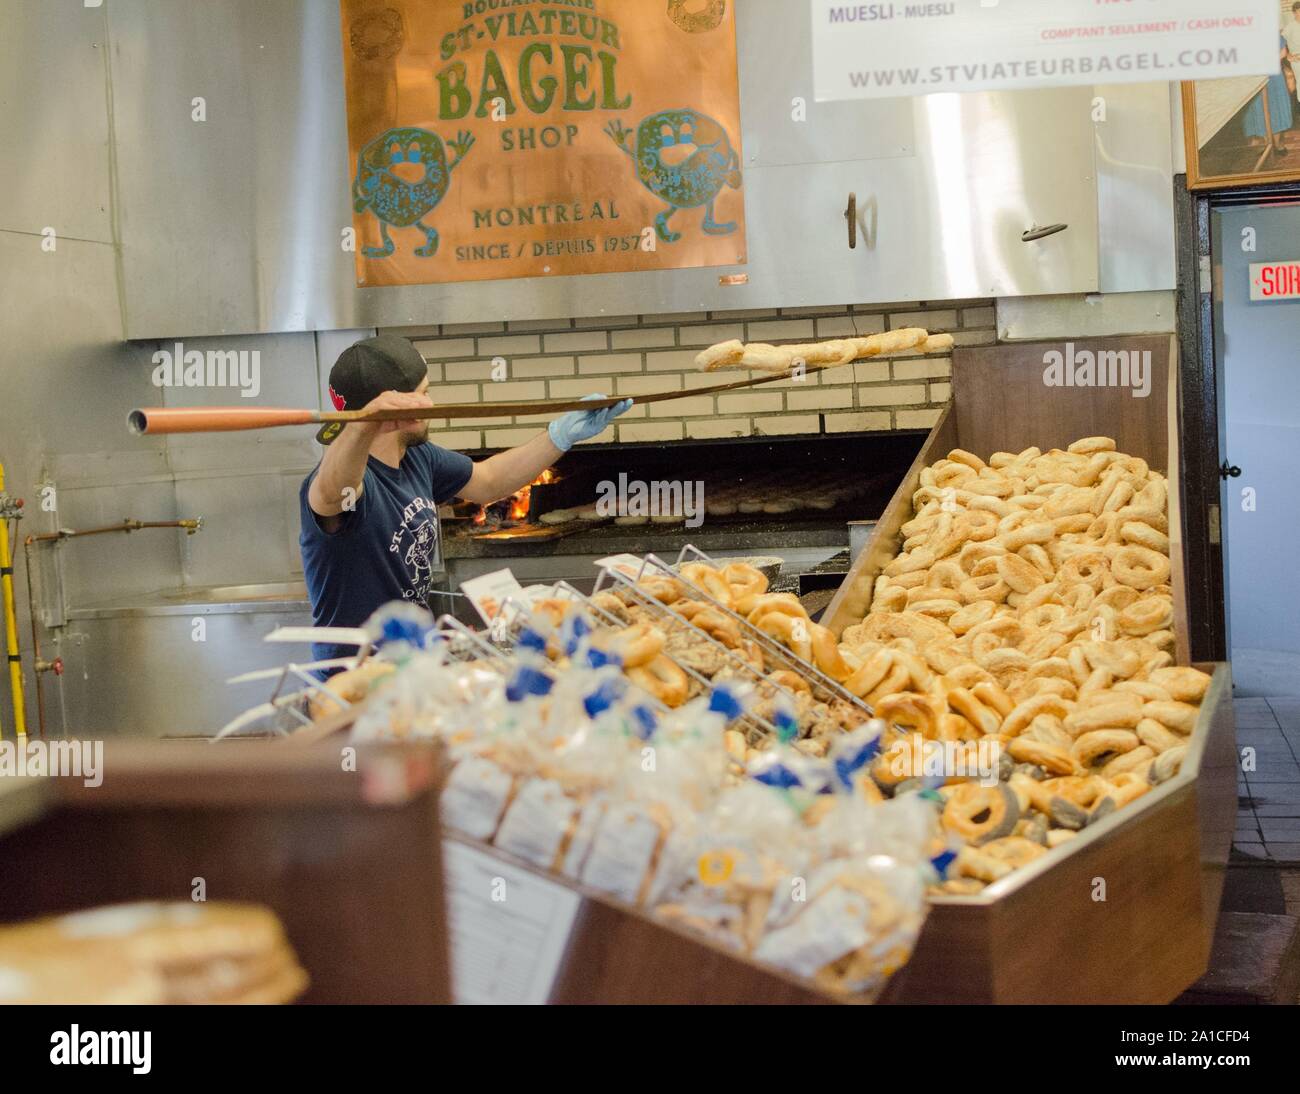 A worker removes fresh Bagels from the oven at St. Viateur Bagel in Montreal Canada. Stock Photo